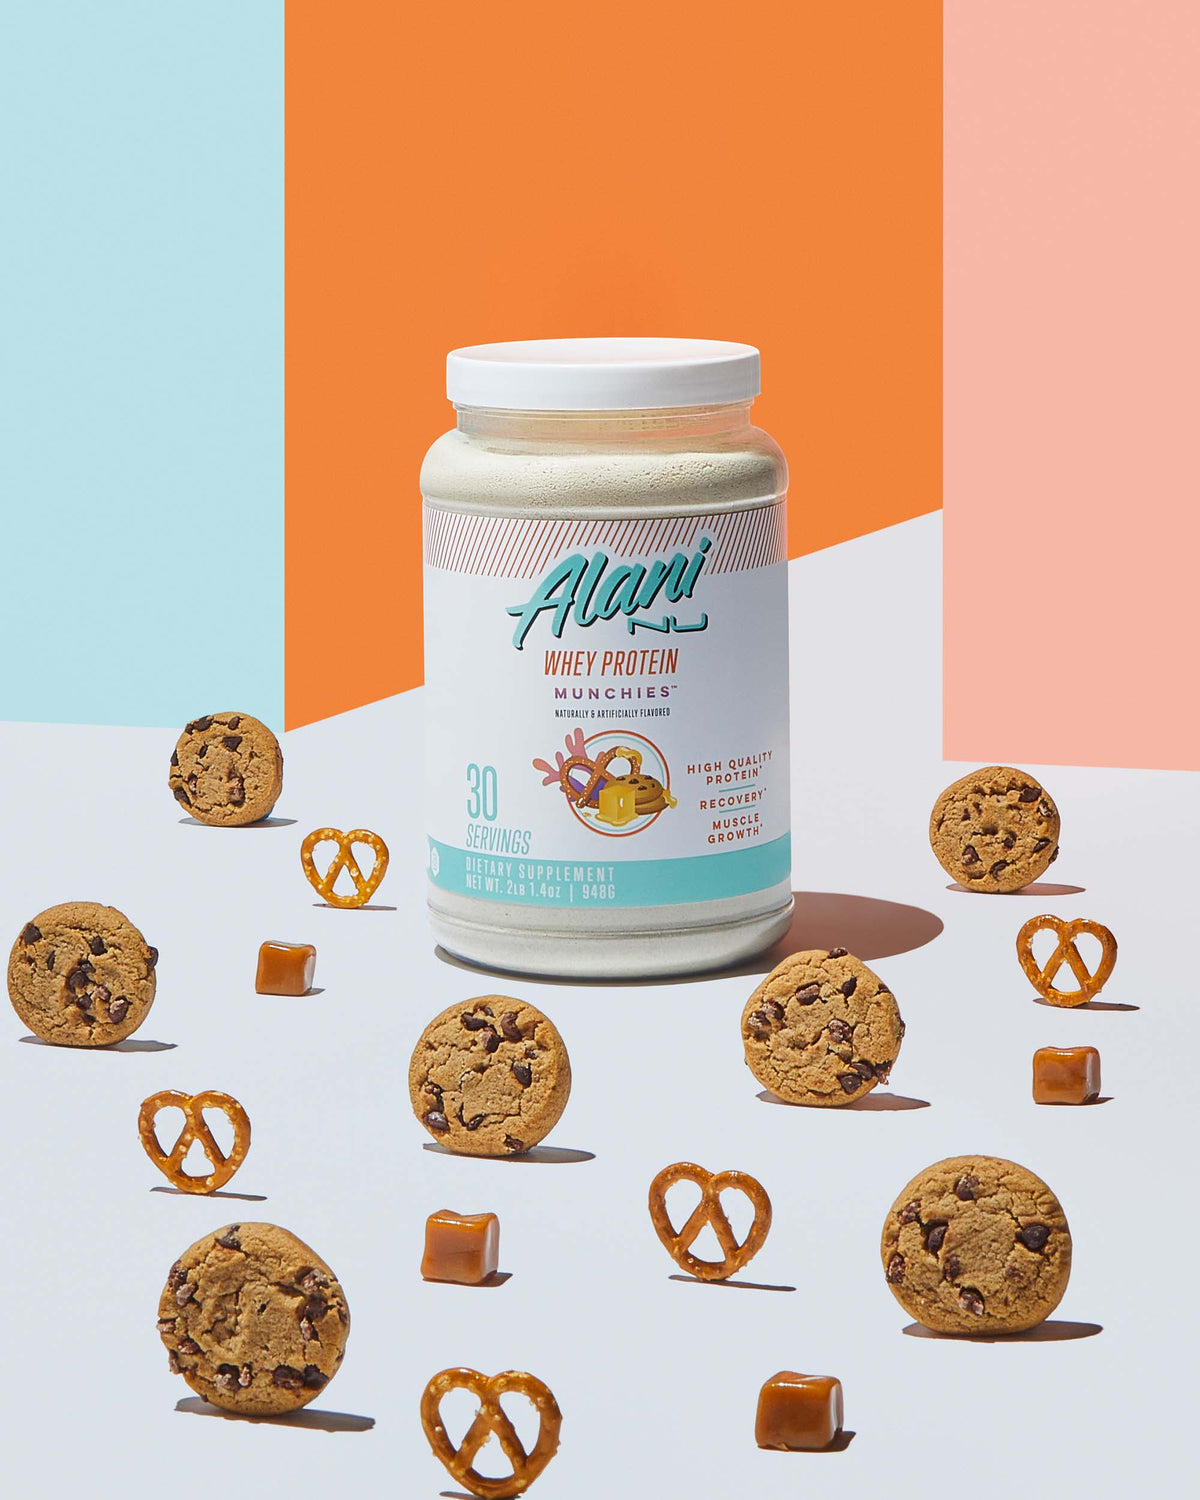 A container  of Whey Protein - Munchies by Alani Nu surrounded by cookies and pretzels.